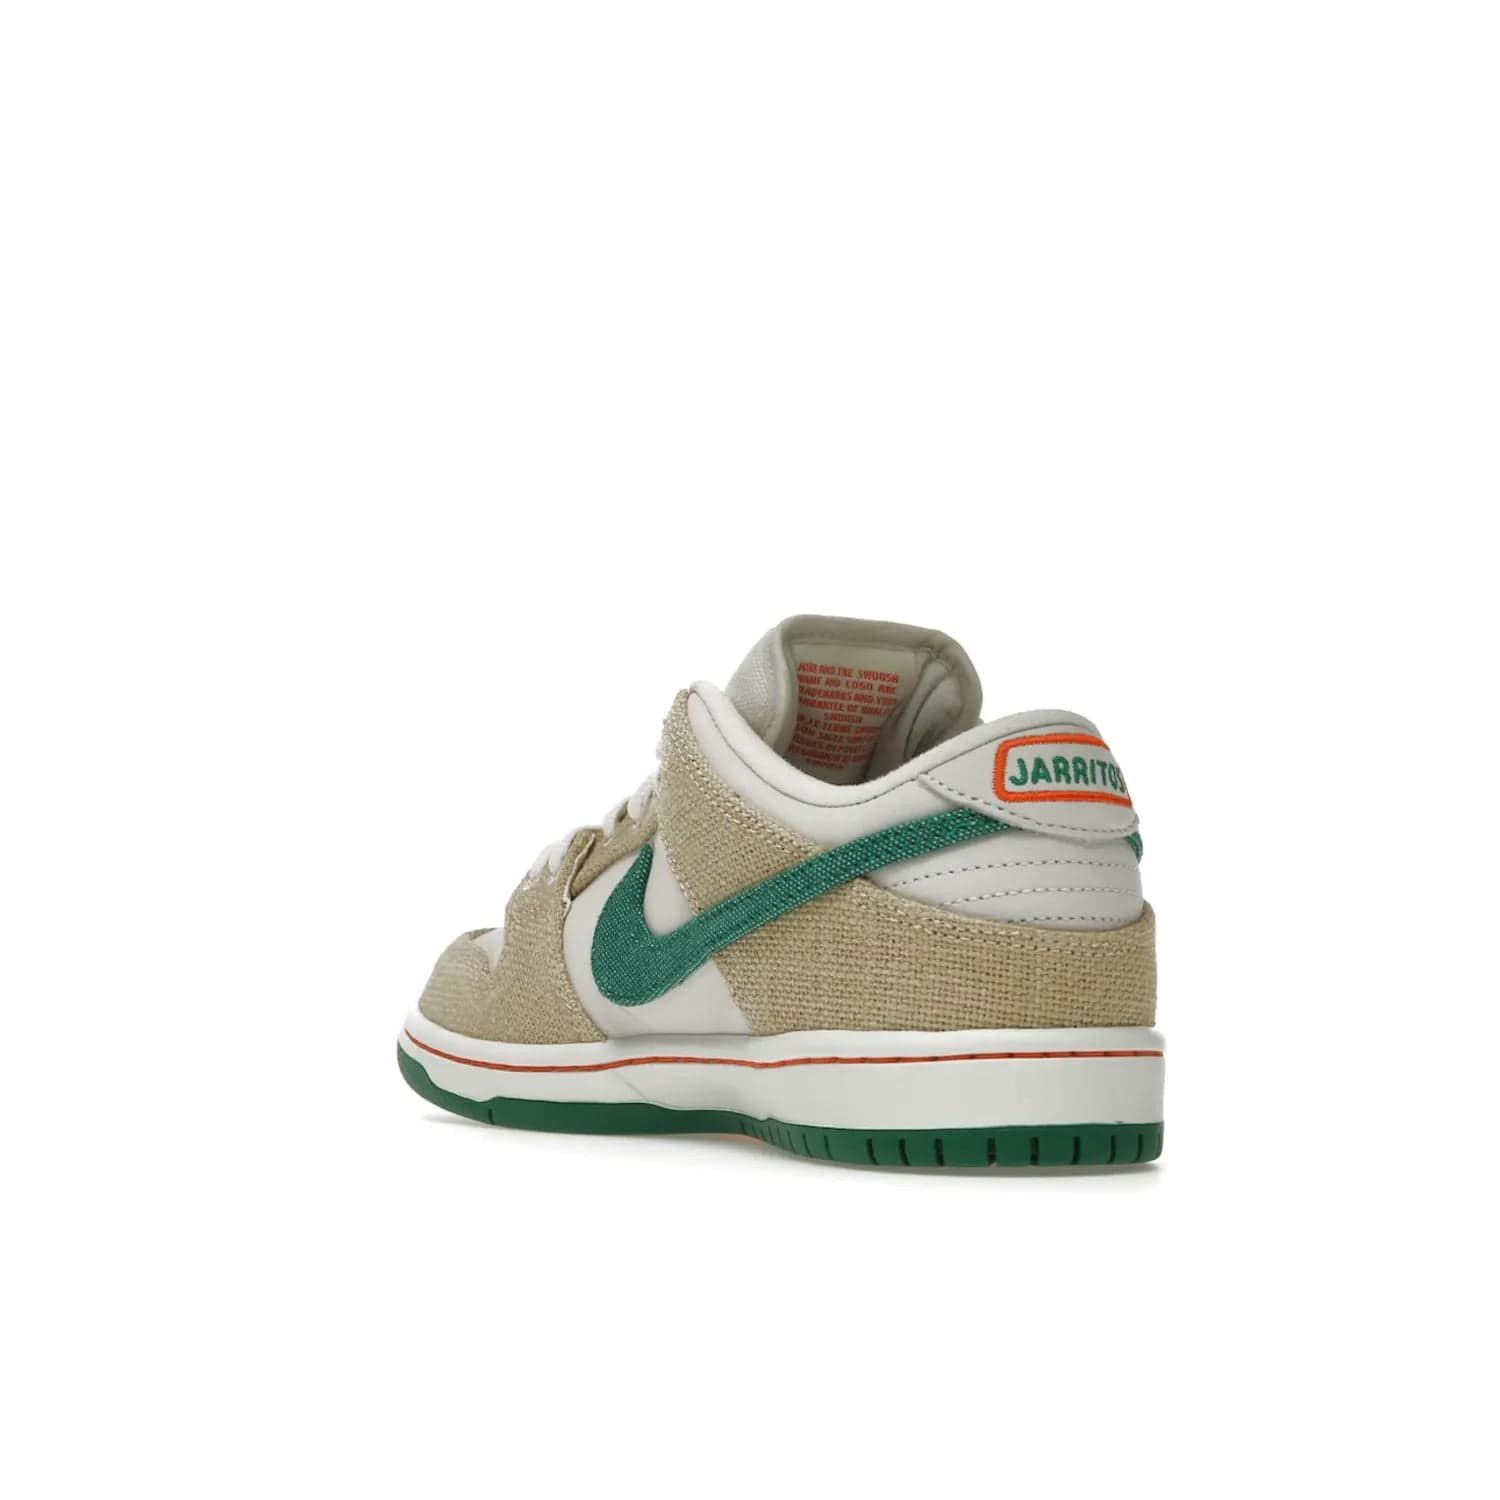 Nike SB Dunk Low Jarritos - Image 25 - Only at www.BallersClubKickz.com - Shop limited edition Nike SB Dunk Low Jarritos! Crafted with white leather and tear-away canvas materials with green accents. Includes orange, green, and white laces to customize your look. Available now.